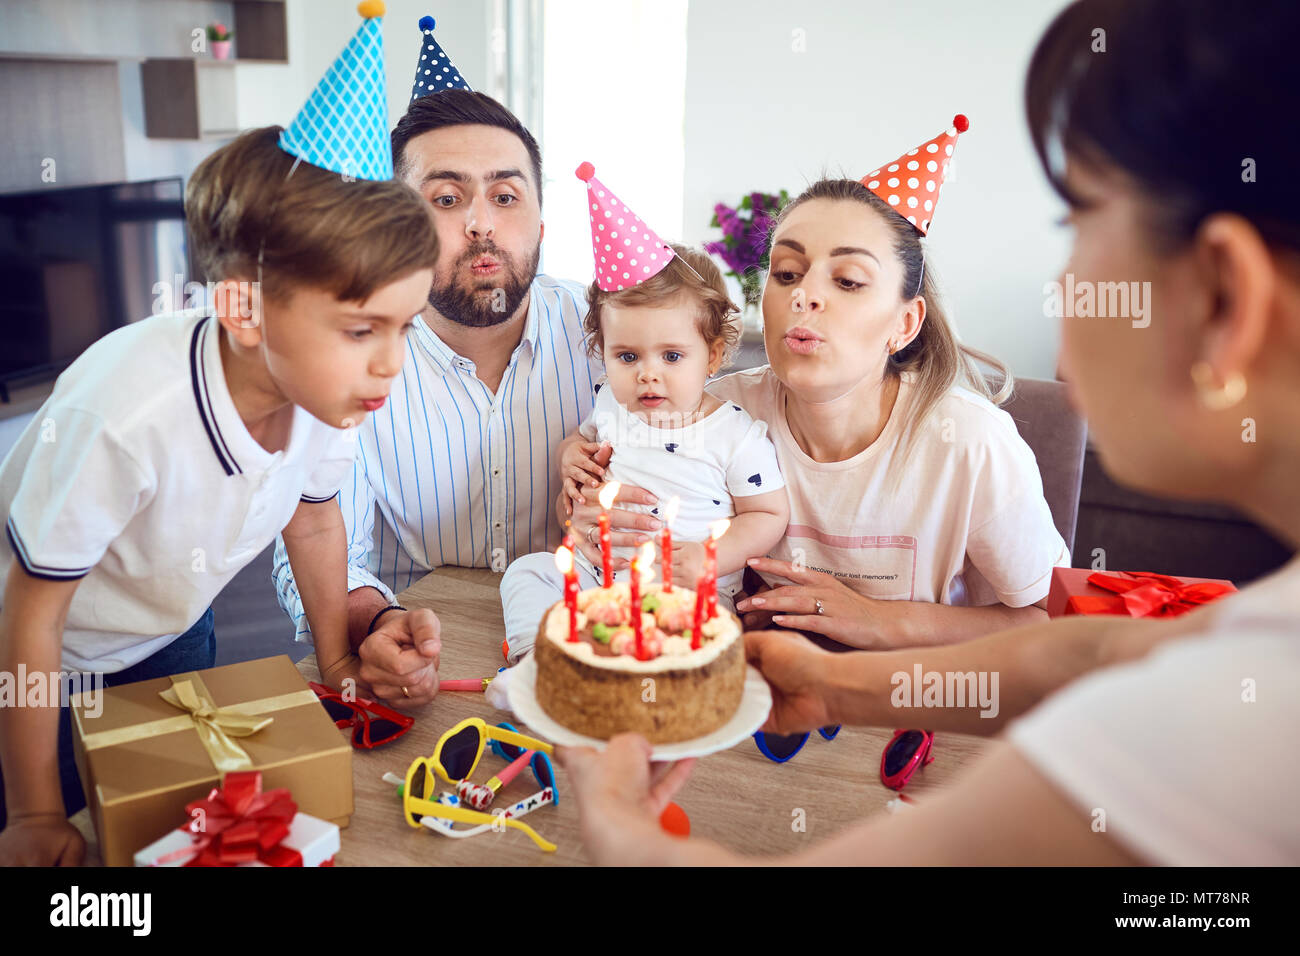 A happy family with a candle cake celebrates a birthday party Stock Photo